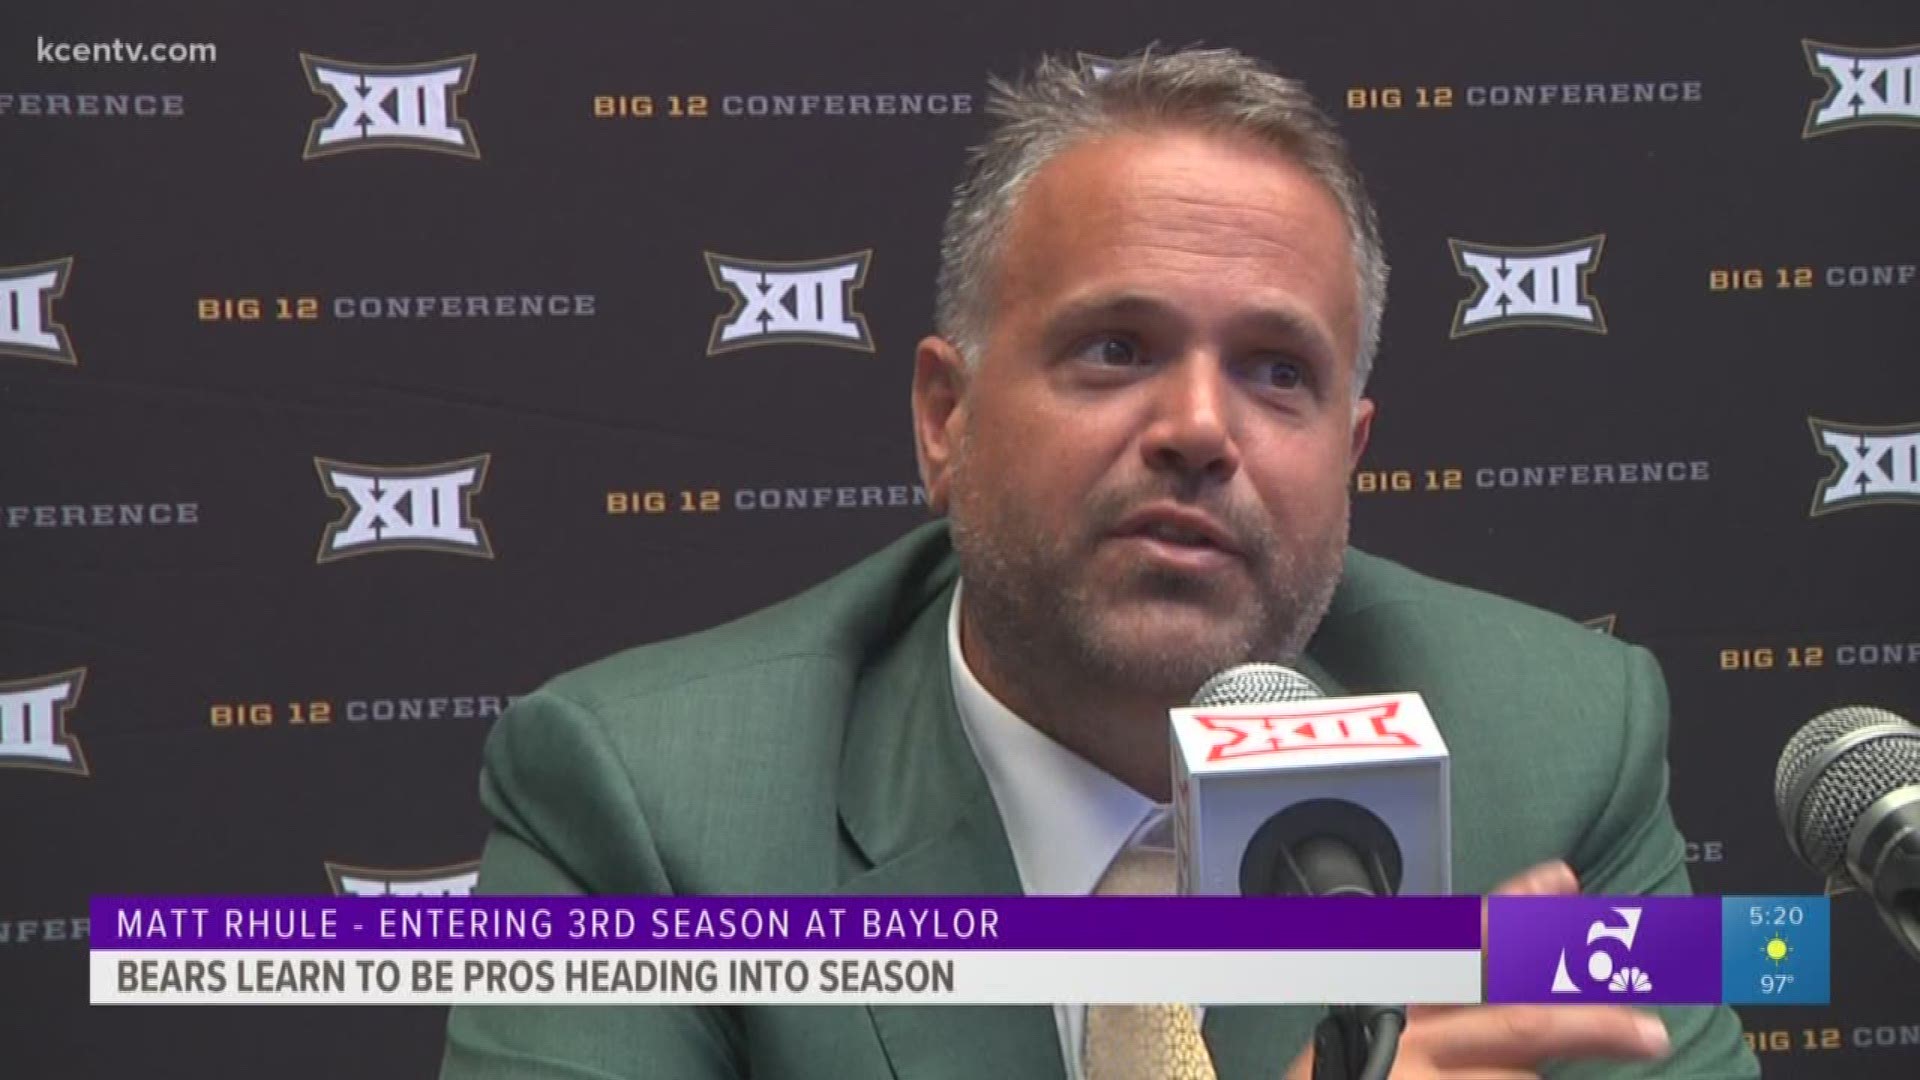 Coach Matt Rhule took the senior Bears to Philadelphia to meet with folks in the NFL to talk about what it takes to become professional football players.